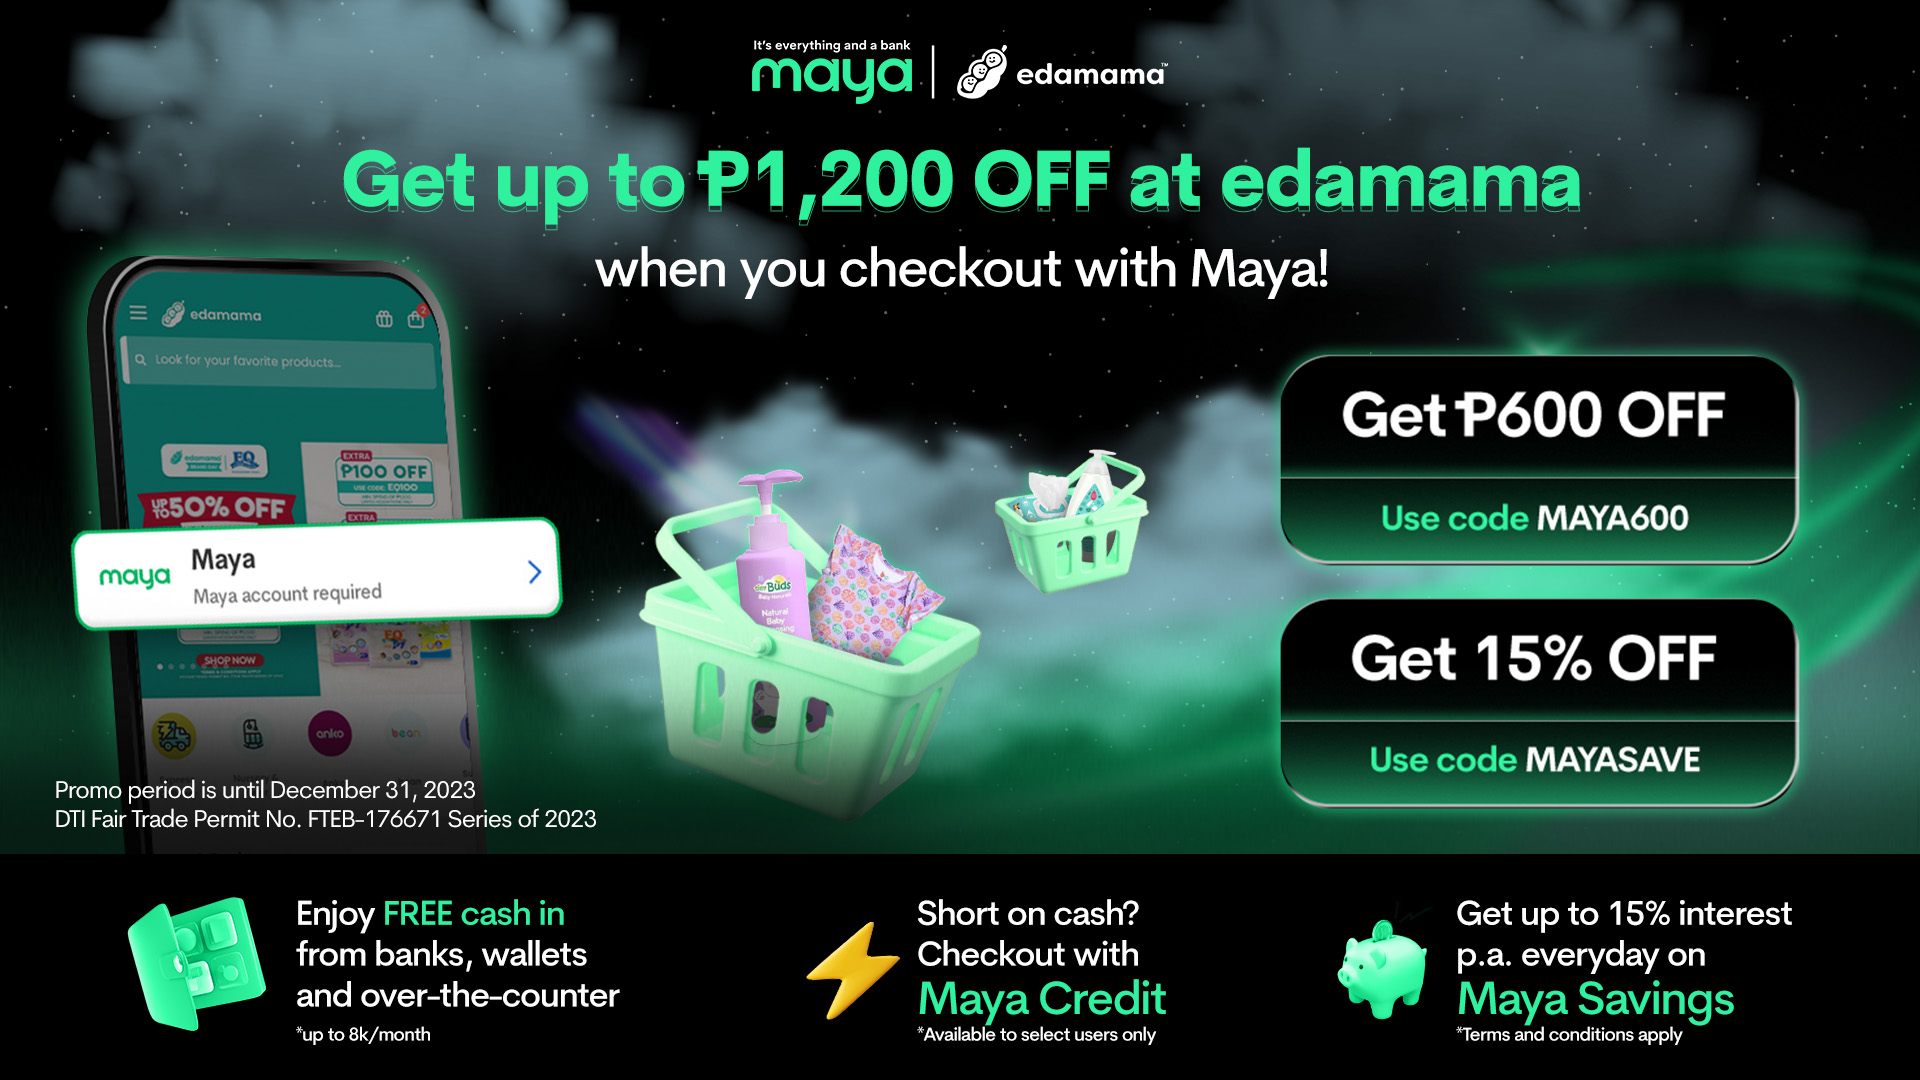 Save up to 15% OFF when you checkout with Maya on edamama!